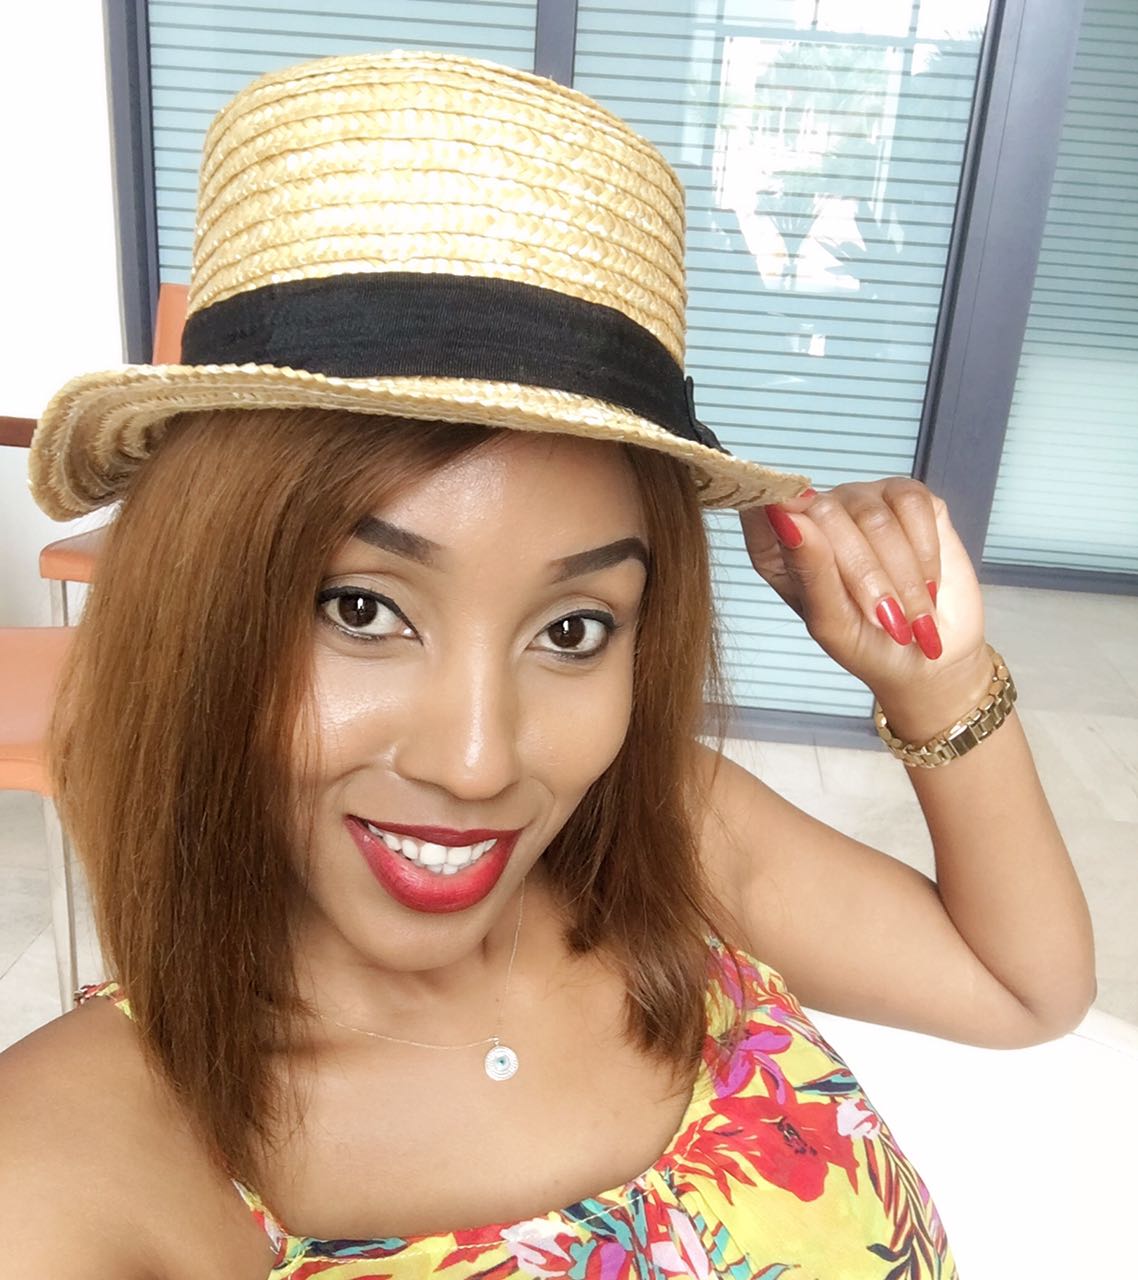 Team mafisi goes crazy after Ebru Tv’s new anchor, Doreen Gatwiri shows off her hips in this tiny skirt